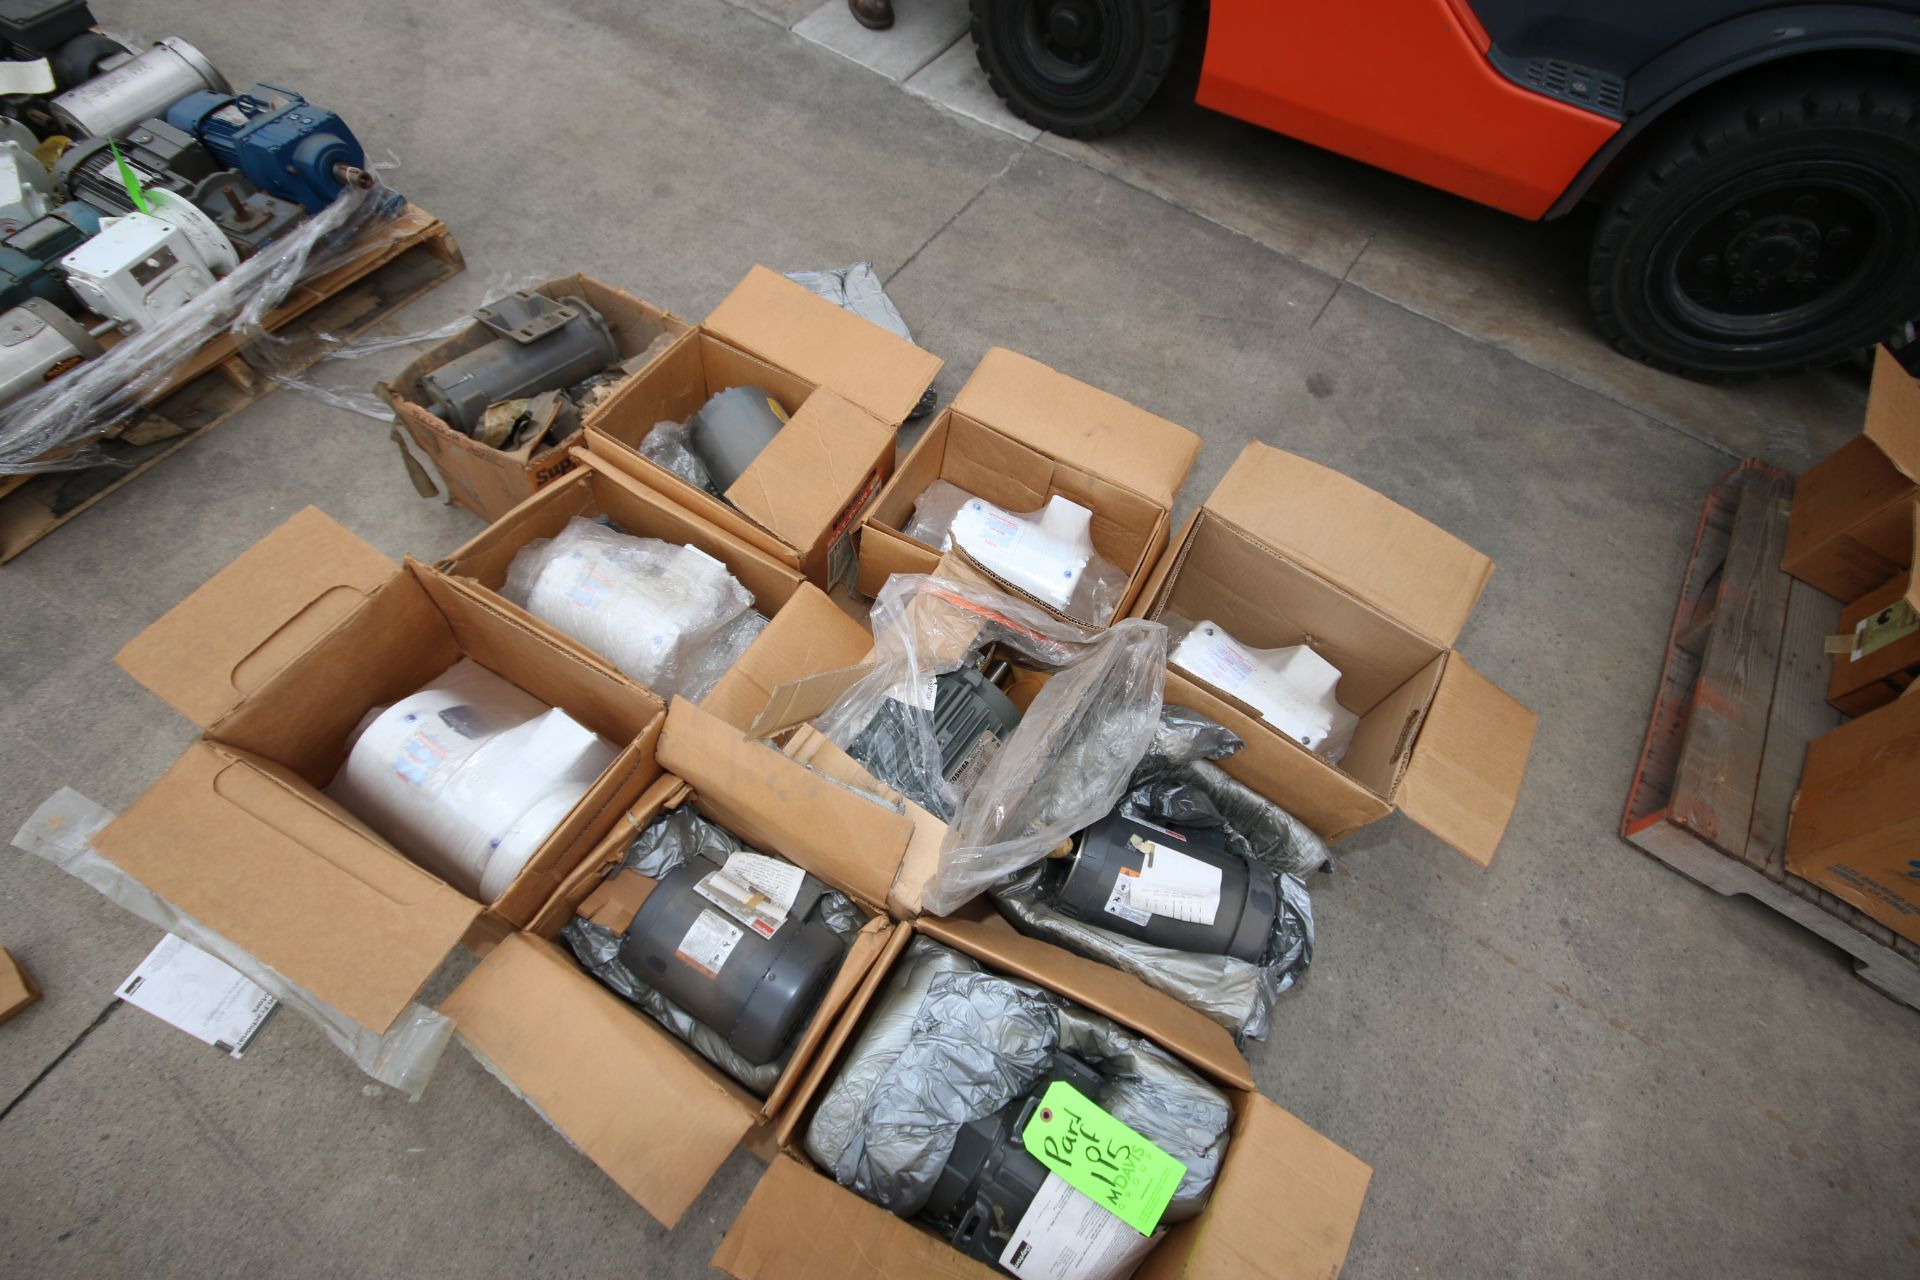 3-Pallets of NEW Motors and Drives, Aprox. (32) NEW In Box Drives/Motors, hp Range from 1/2 hp- 10 - Image 4 of 5